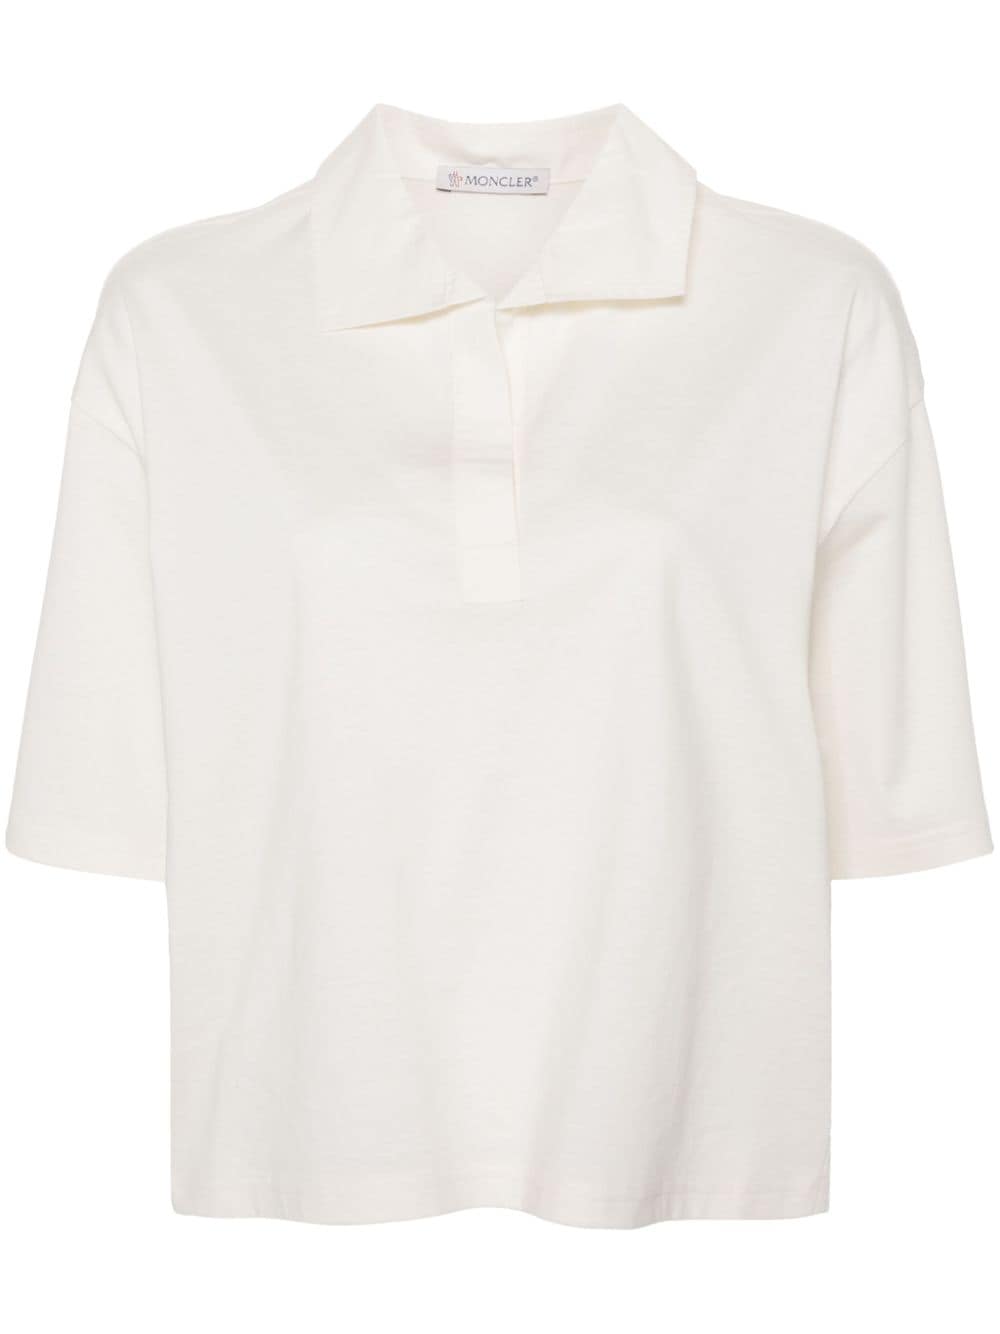 Short-sleeved cotton polo shirt with logo